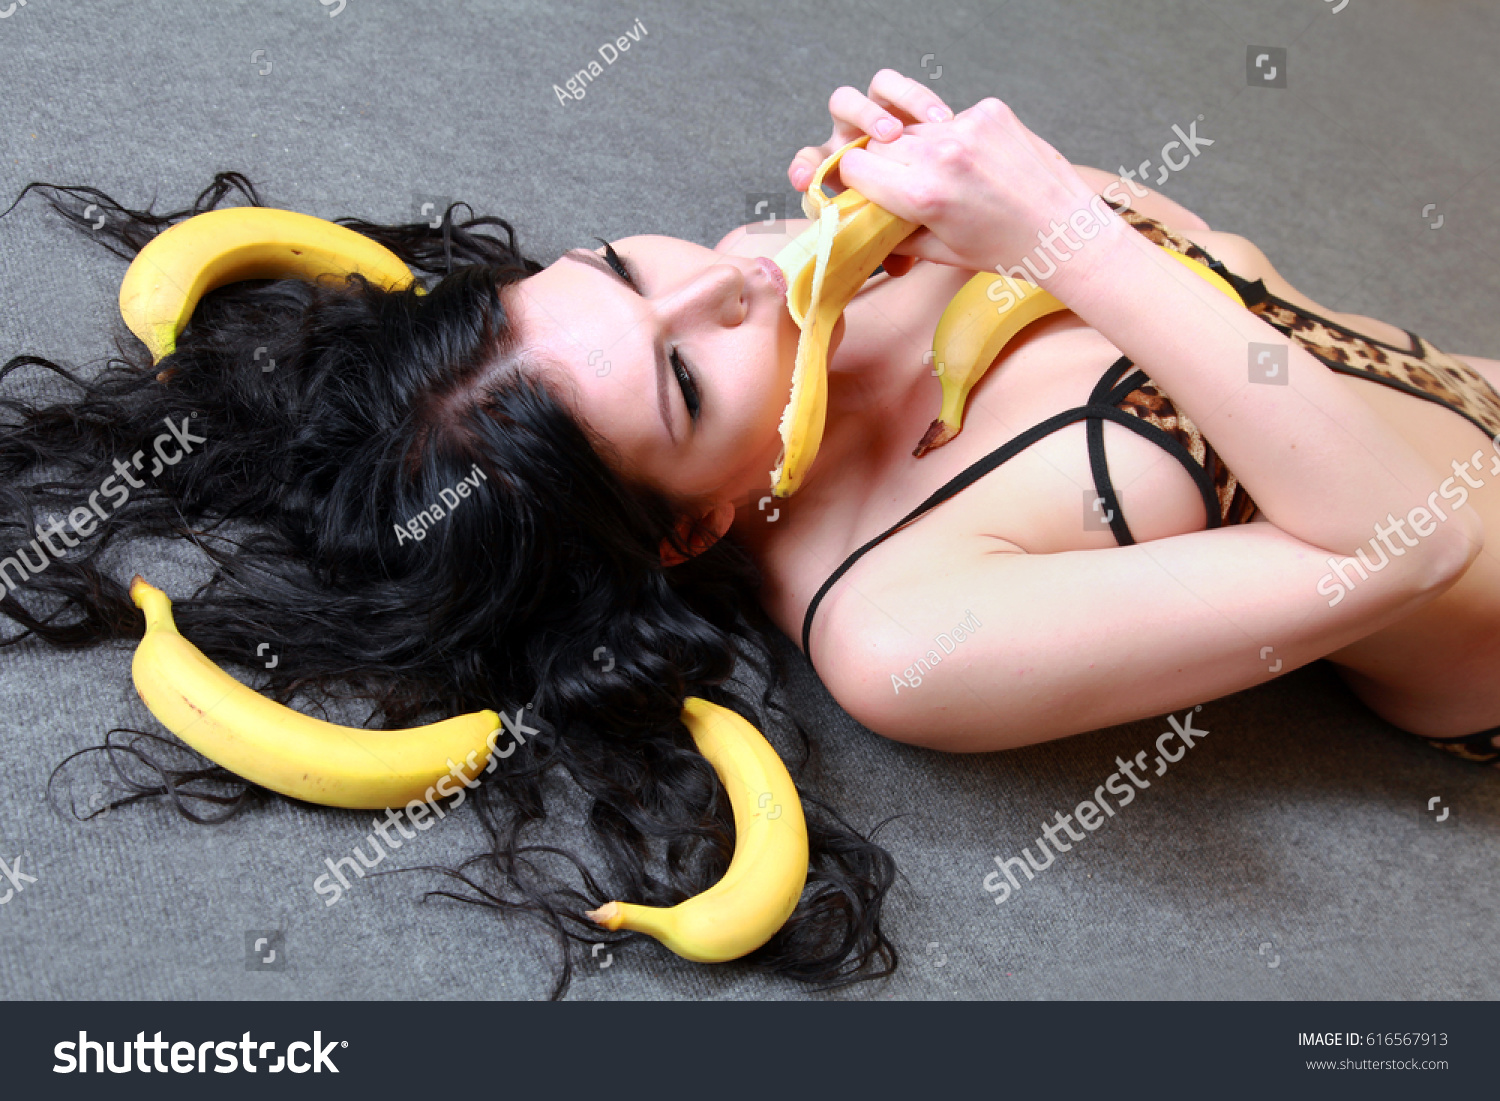 banana licked by a girl